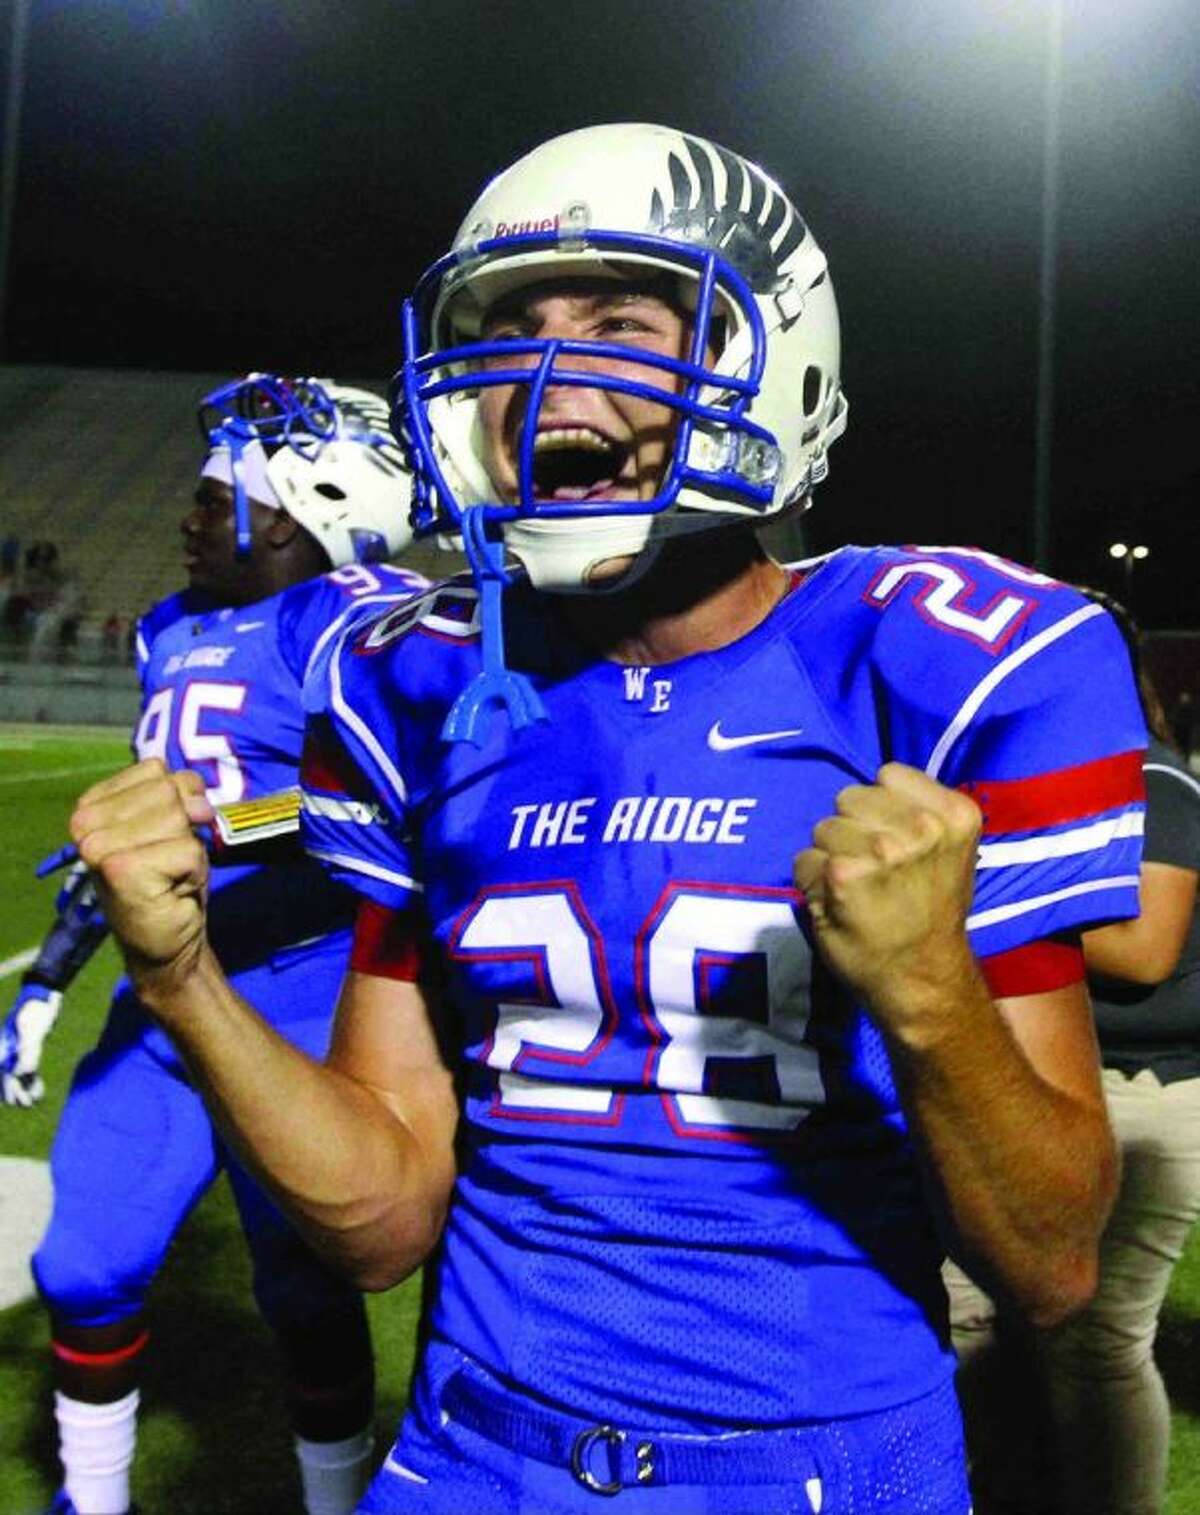 Oak Ridge kicker Patrick Coale celebrates after his 43-yard field goal gave the War Eagles a 45-42 win in double overtime against Stratford Friday. Go to HCNPics.com to view and purchase this photo, and others like it.